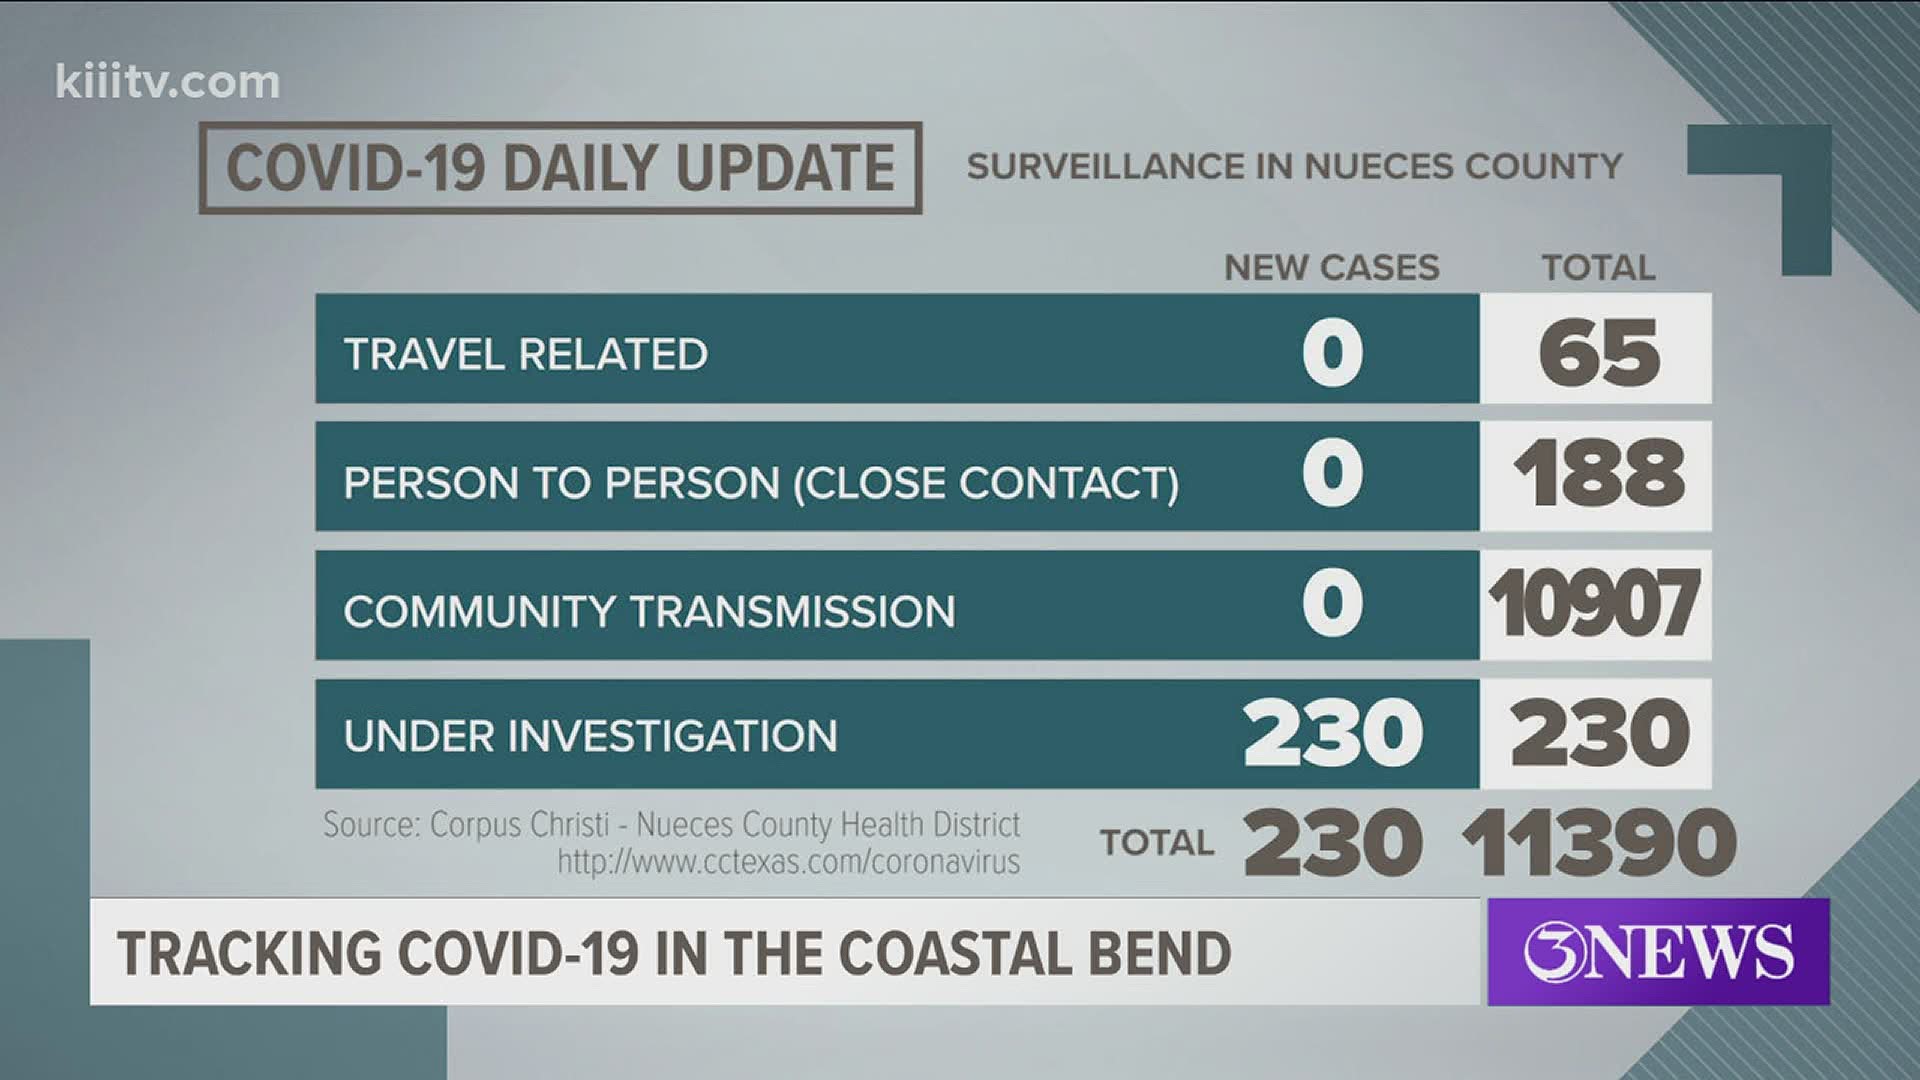 4,071 have recovered in Nueces County.